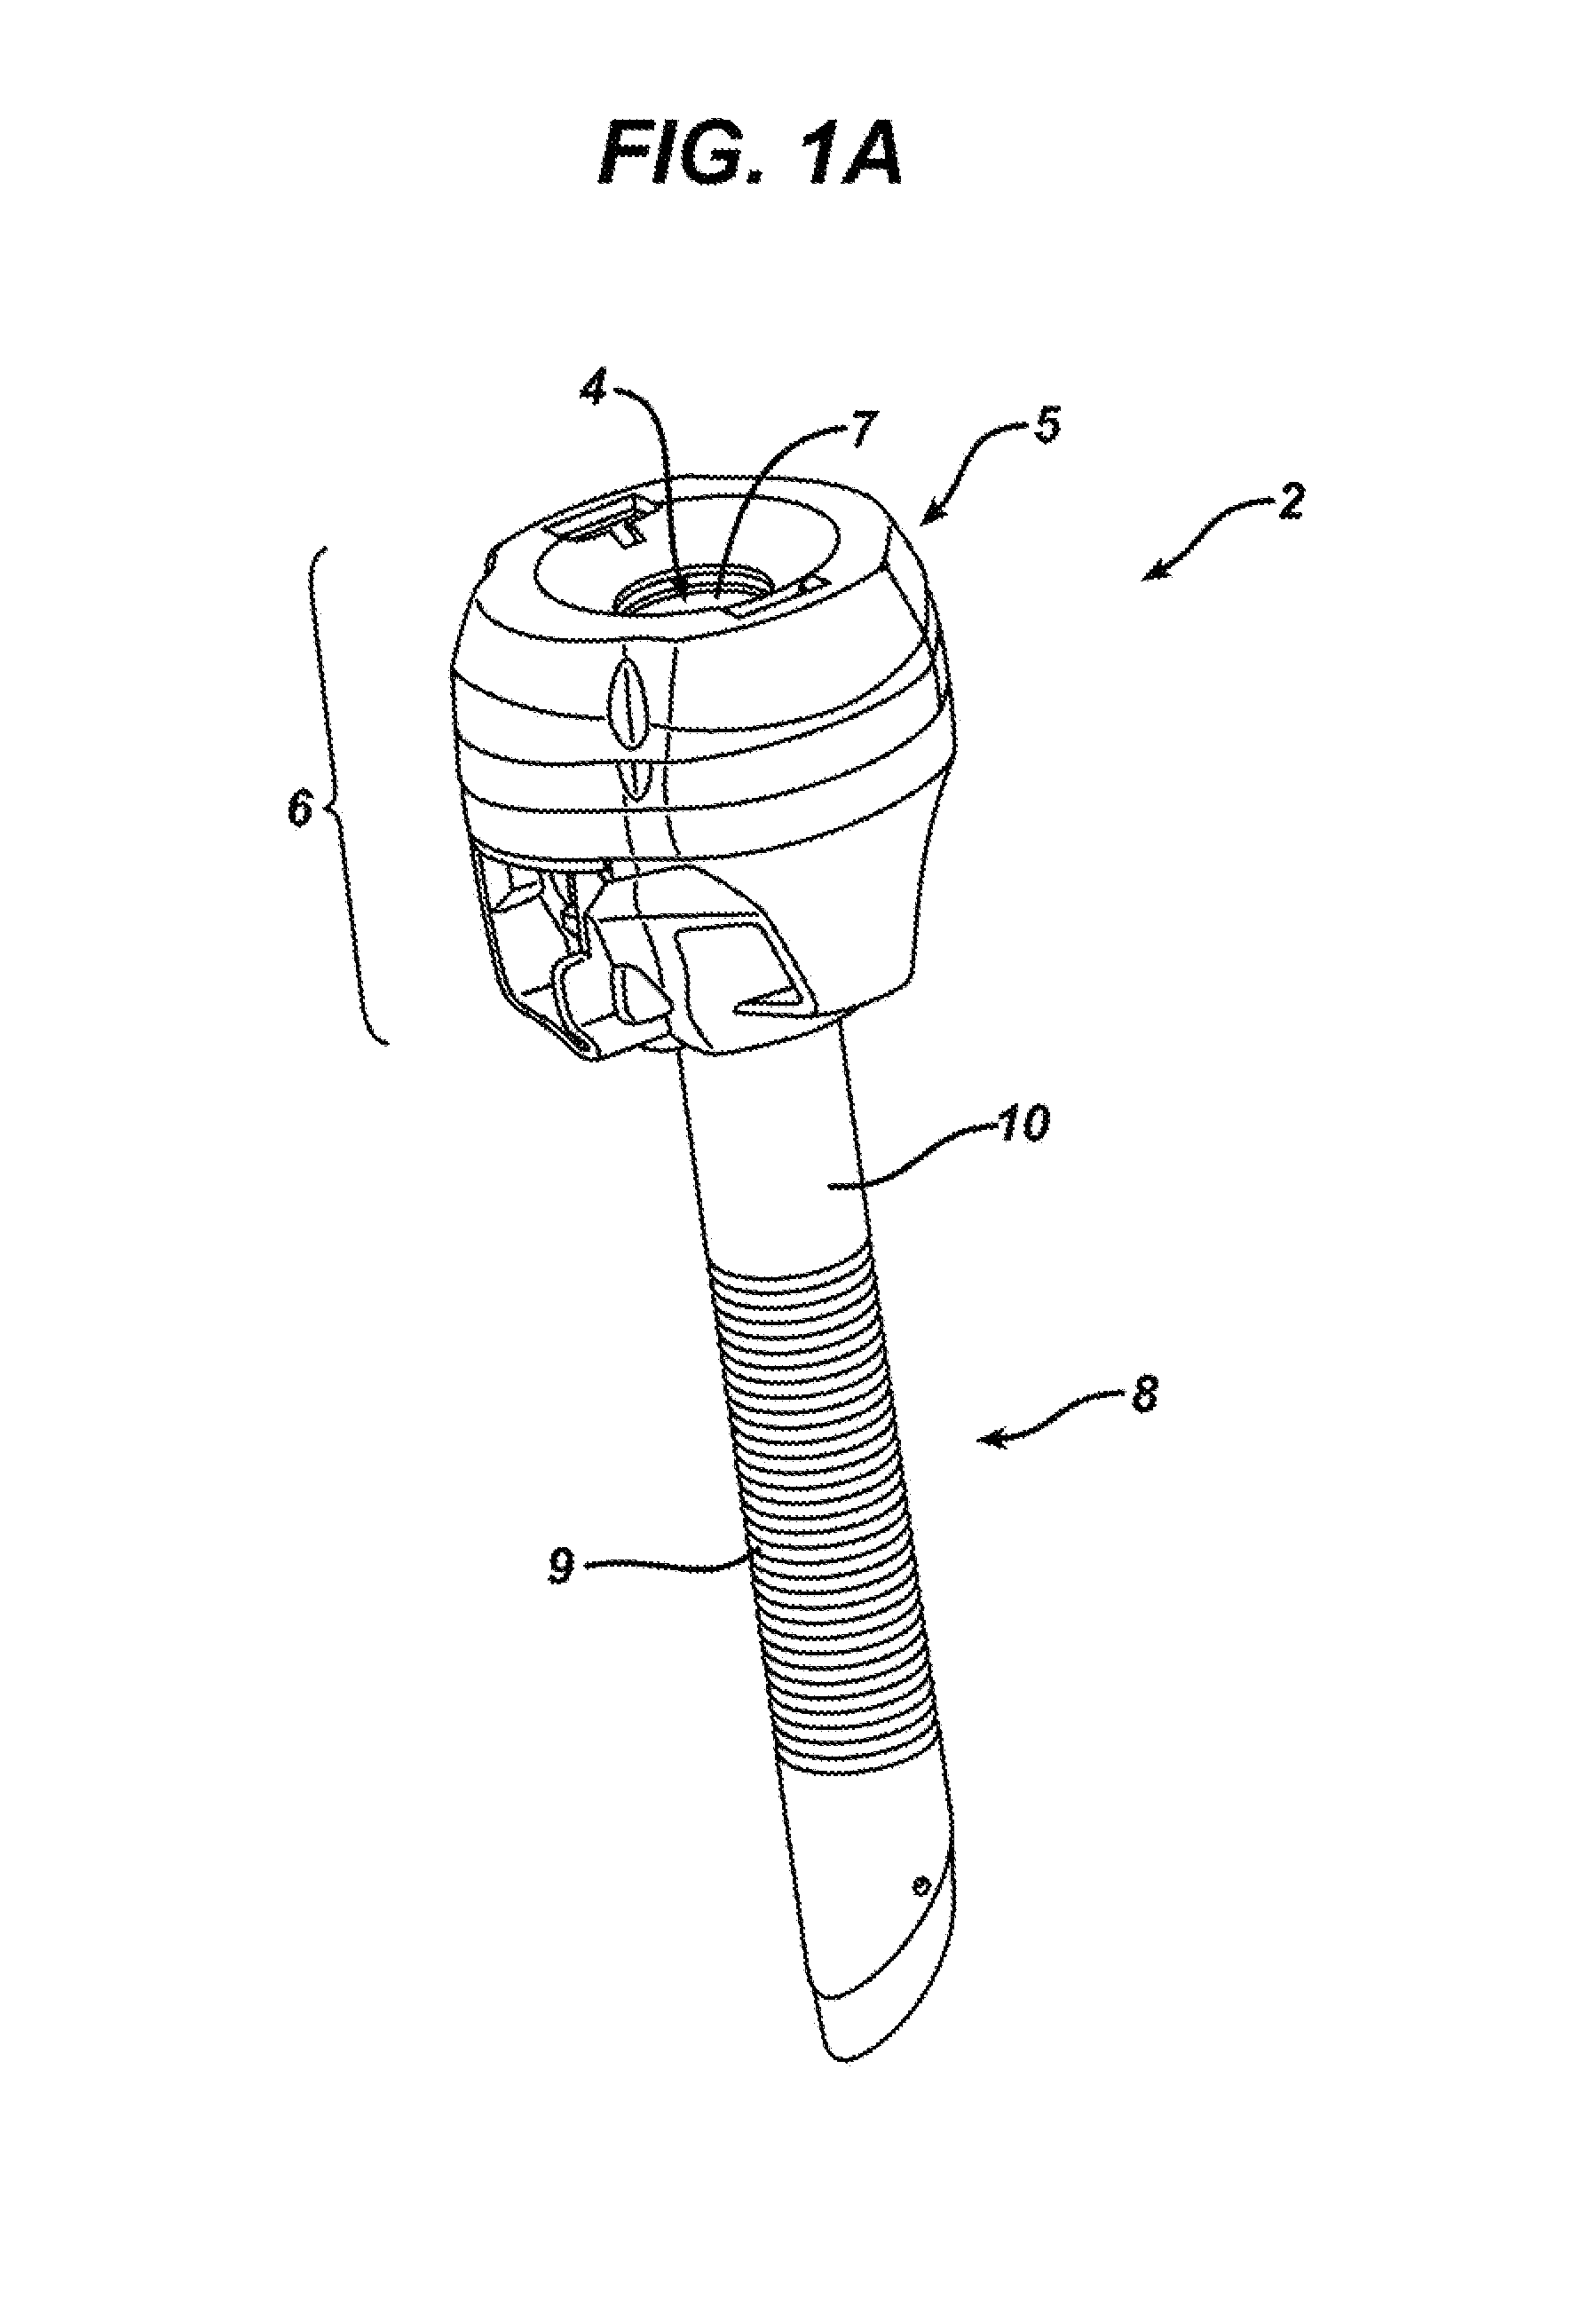 Surgical access device